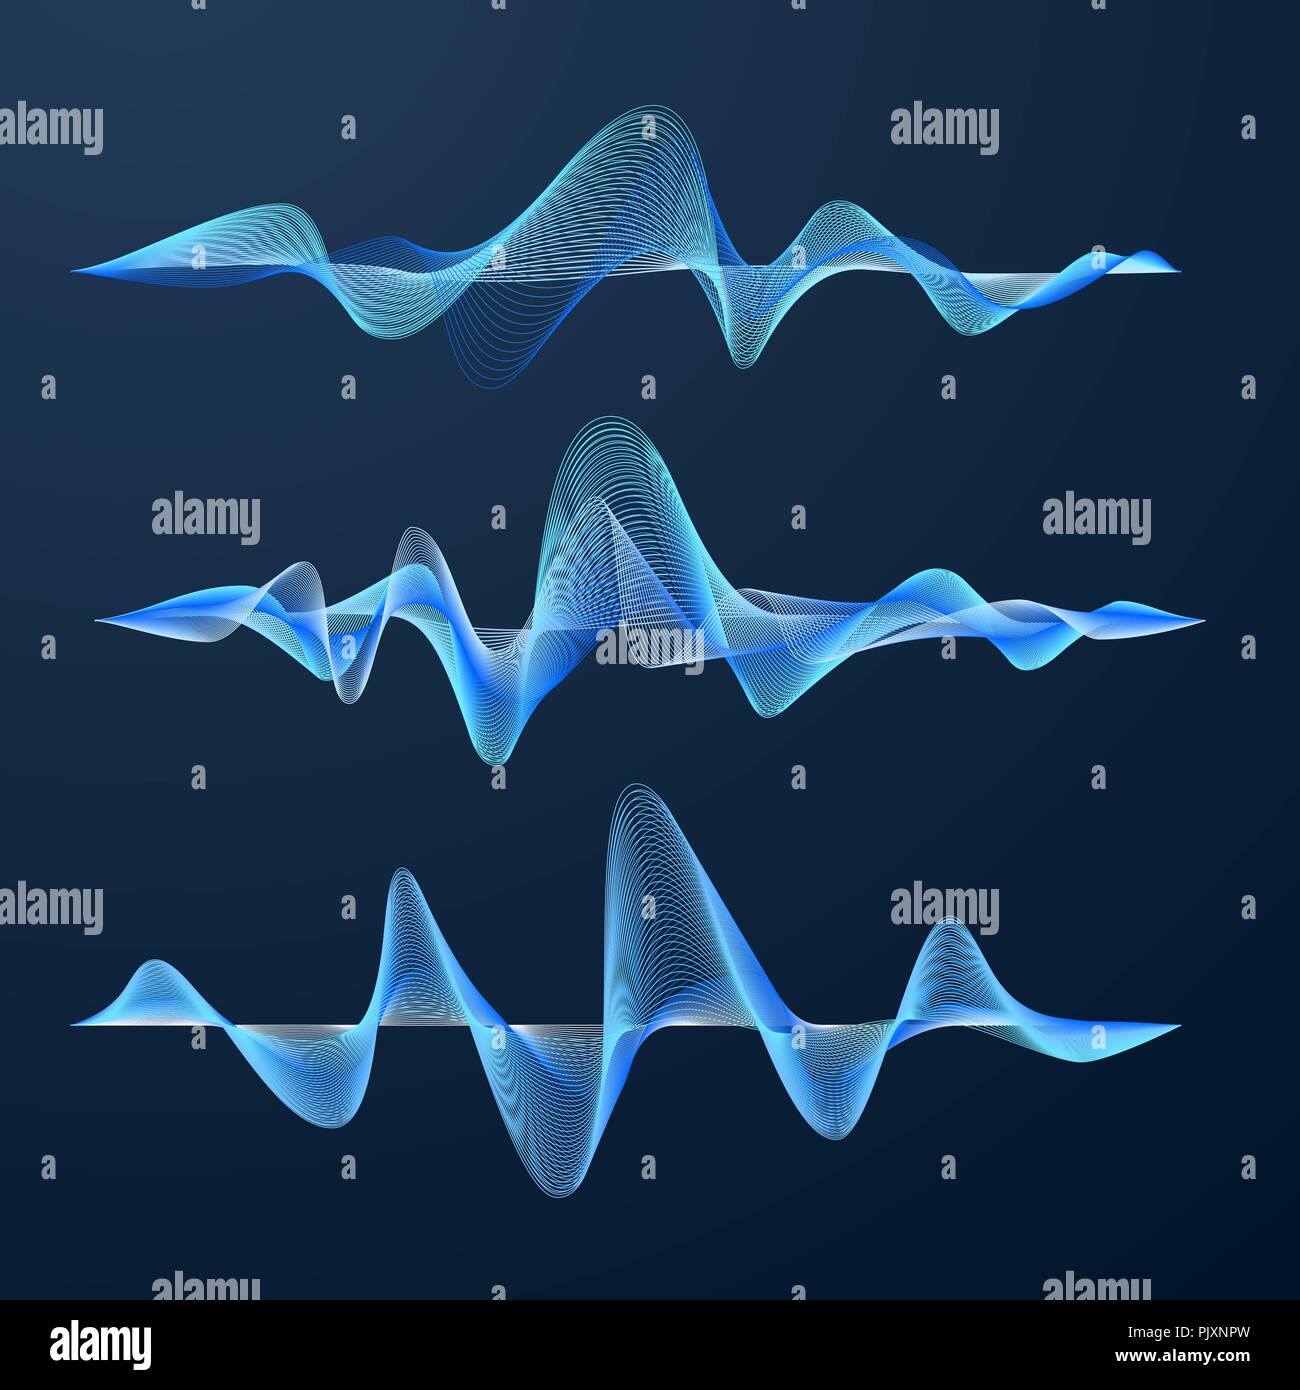 Blue Sound Waves Track Design Set Of Audio Waves Abstract